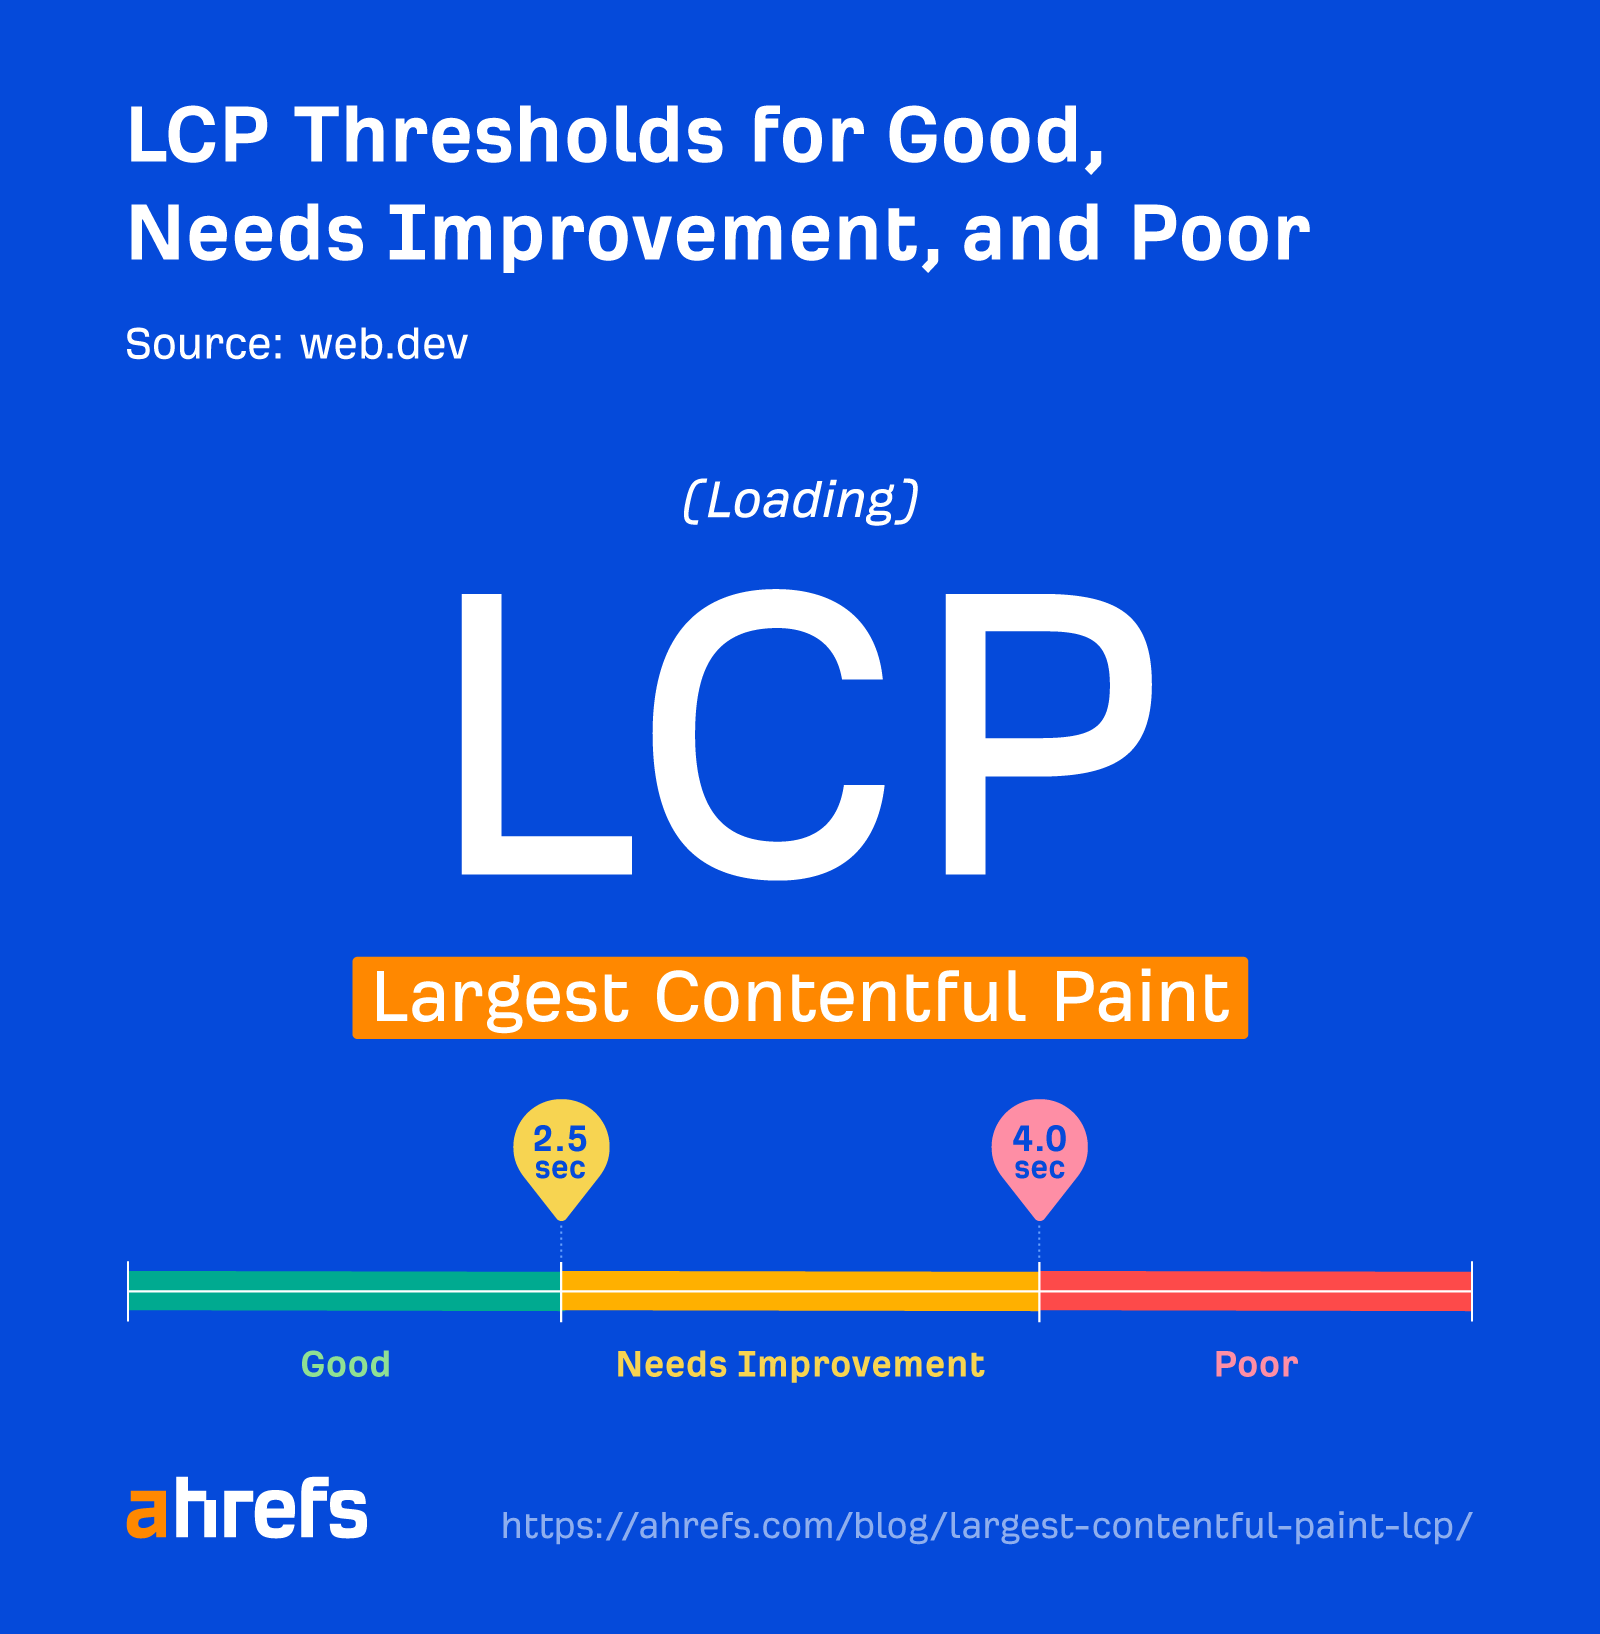 LCP thresholds for good, needs improvement, and poor